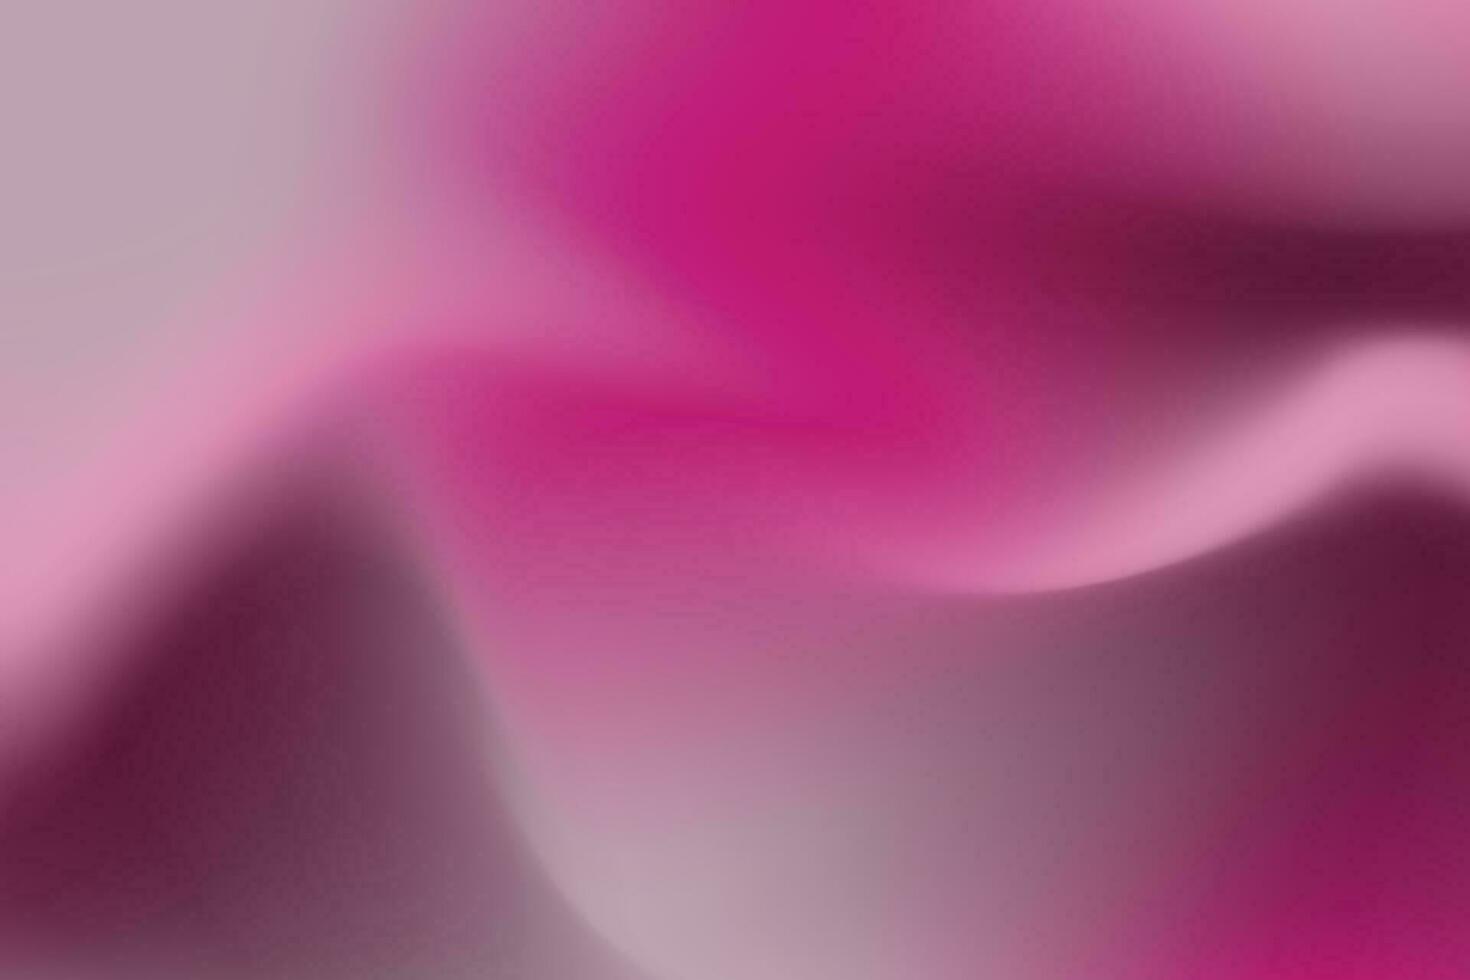 Colorful abstract pink and purple background template. Beautiful swirling pink and purple colors. Perfect for app, web design, webpages, banners, greeting cards, backgrounds, templates. Vector